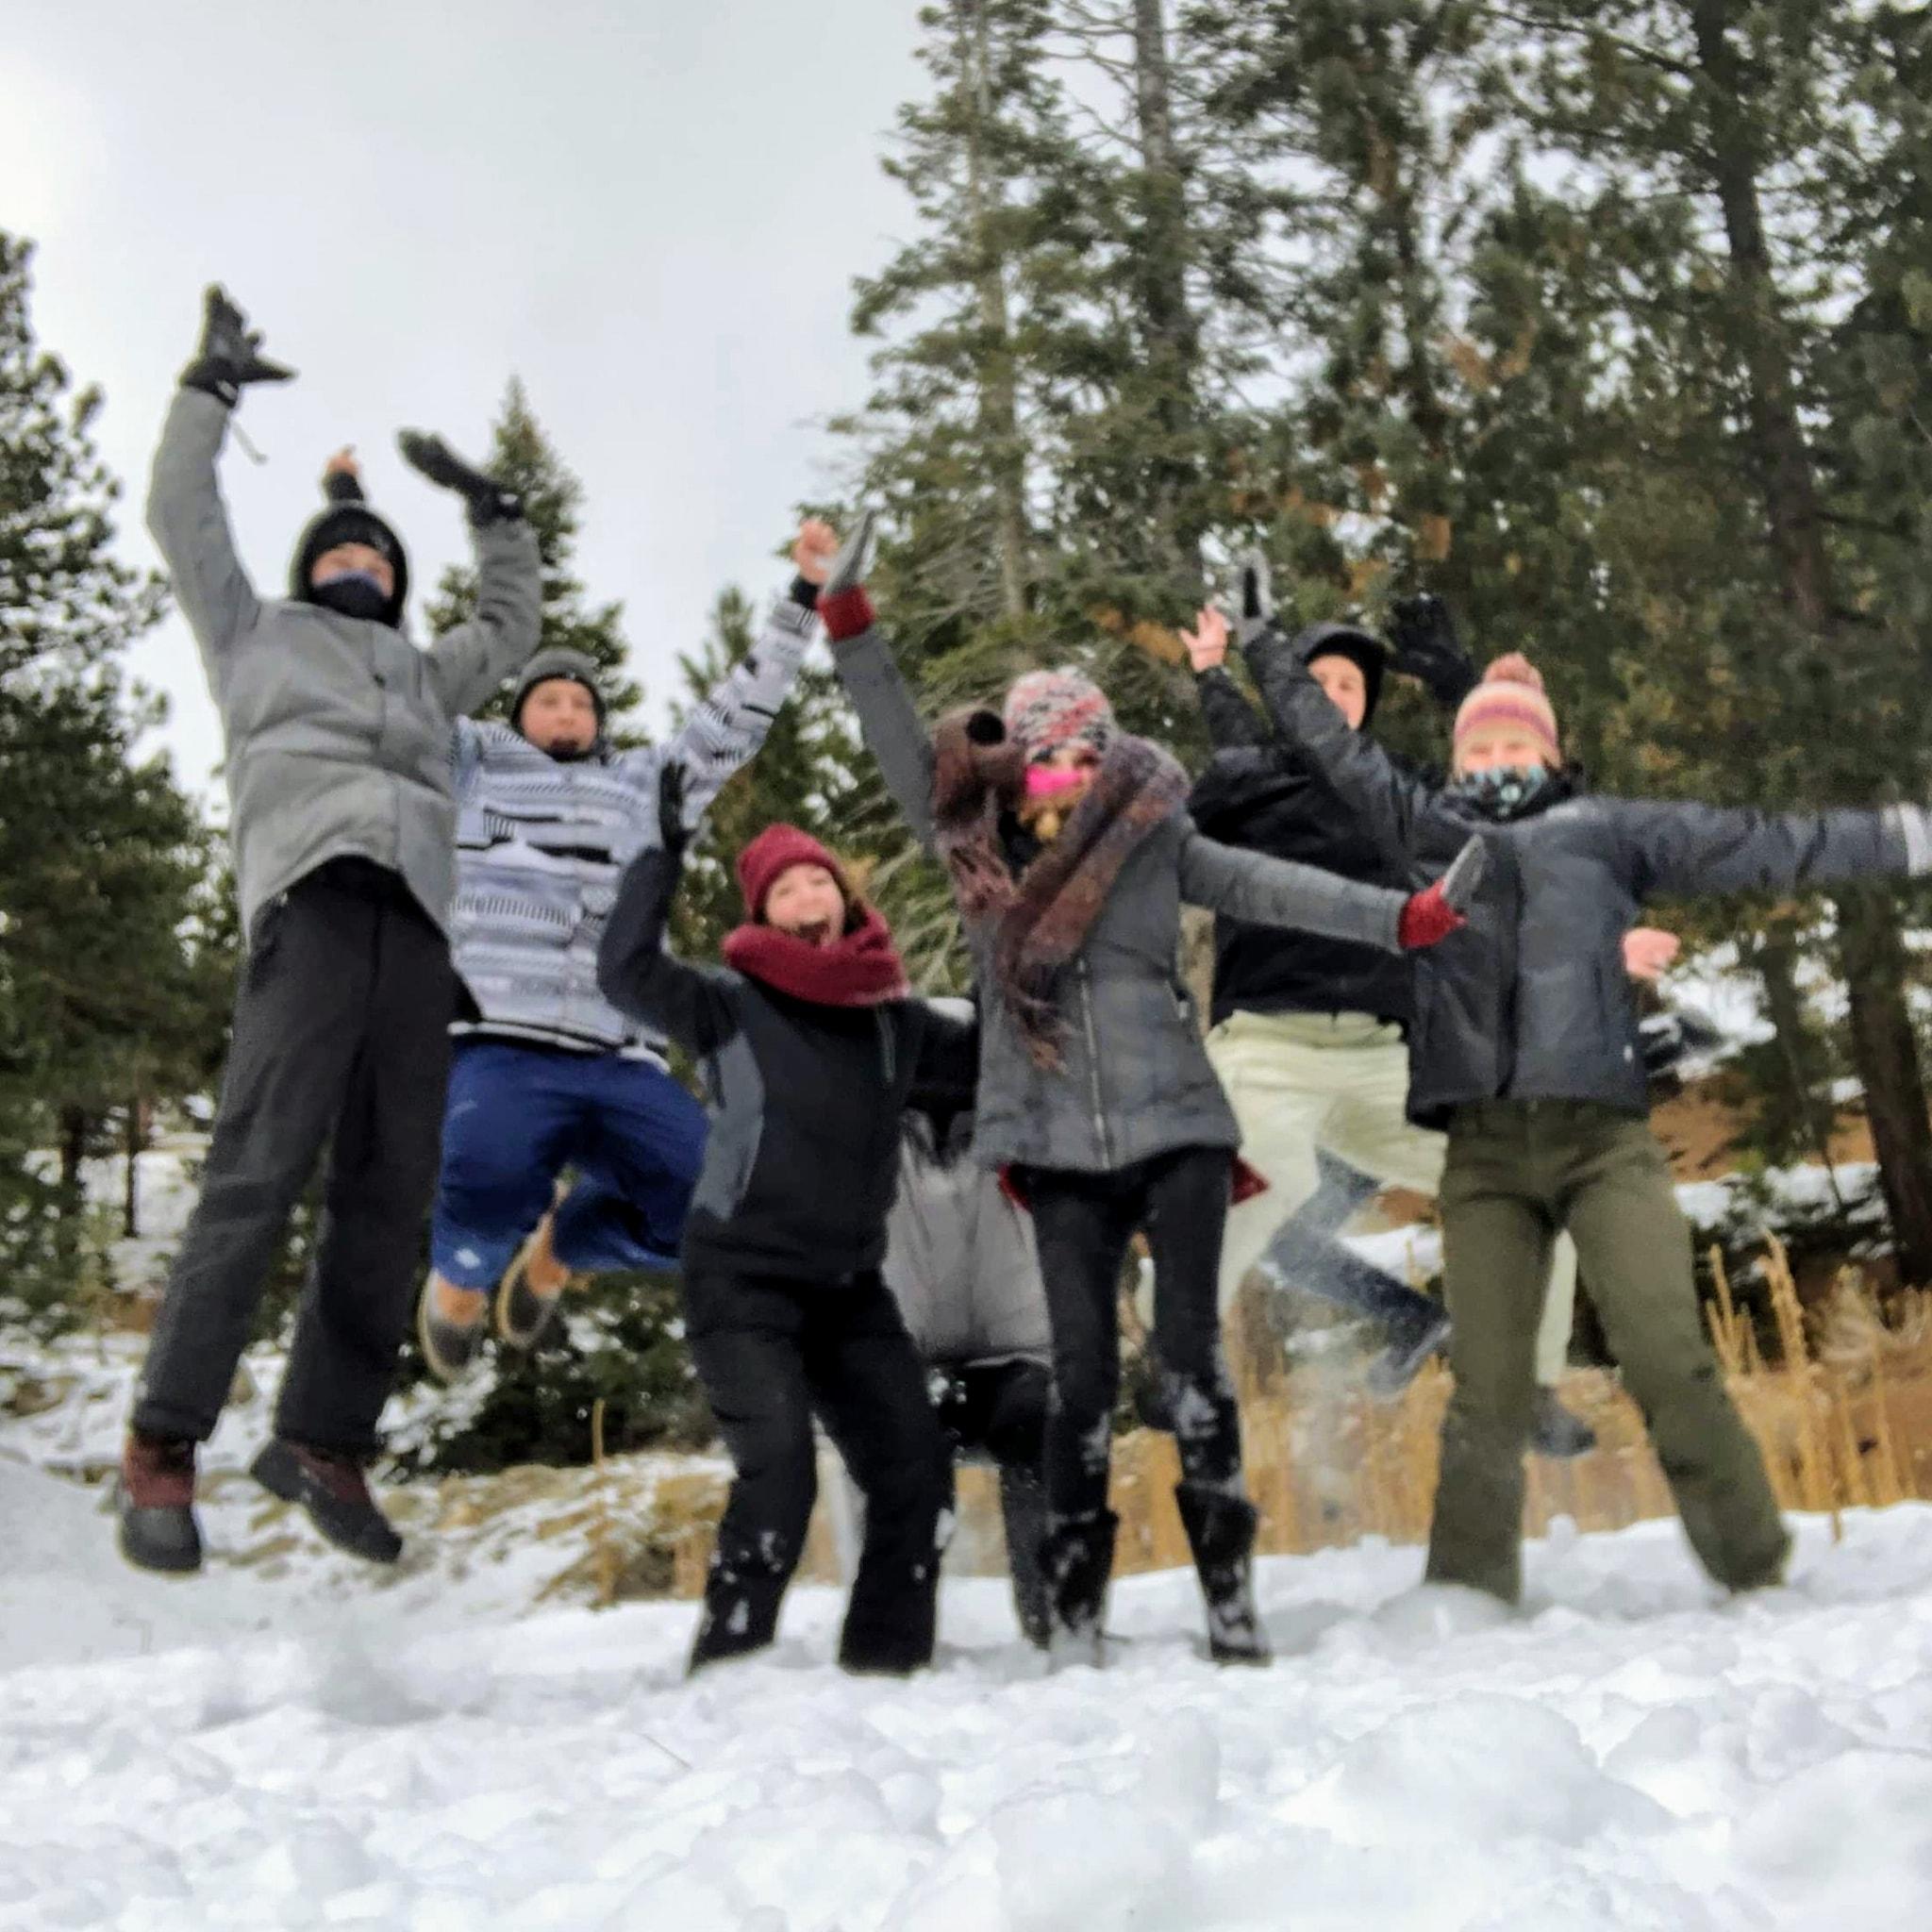 - New Year's Eve 2019 - 

Trip to Tahoe with friends!